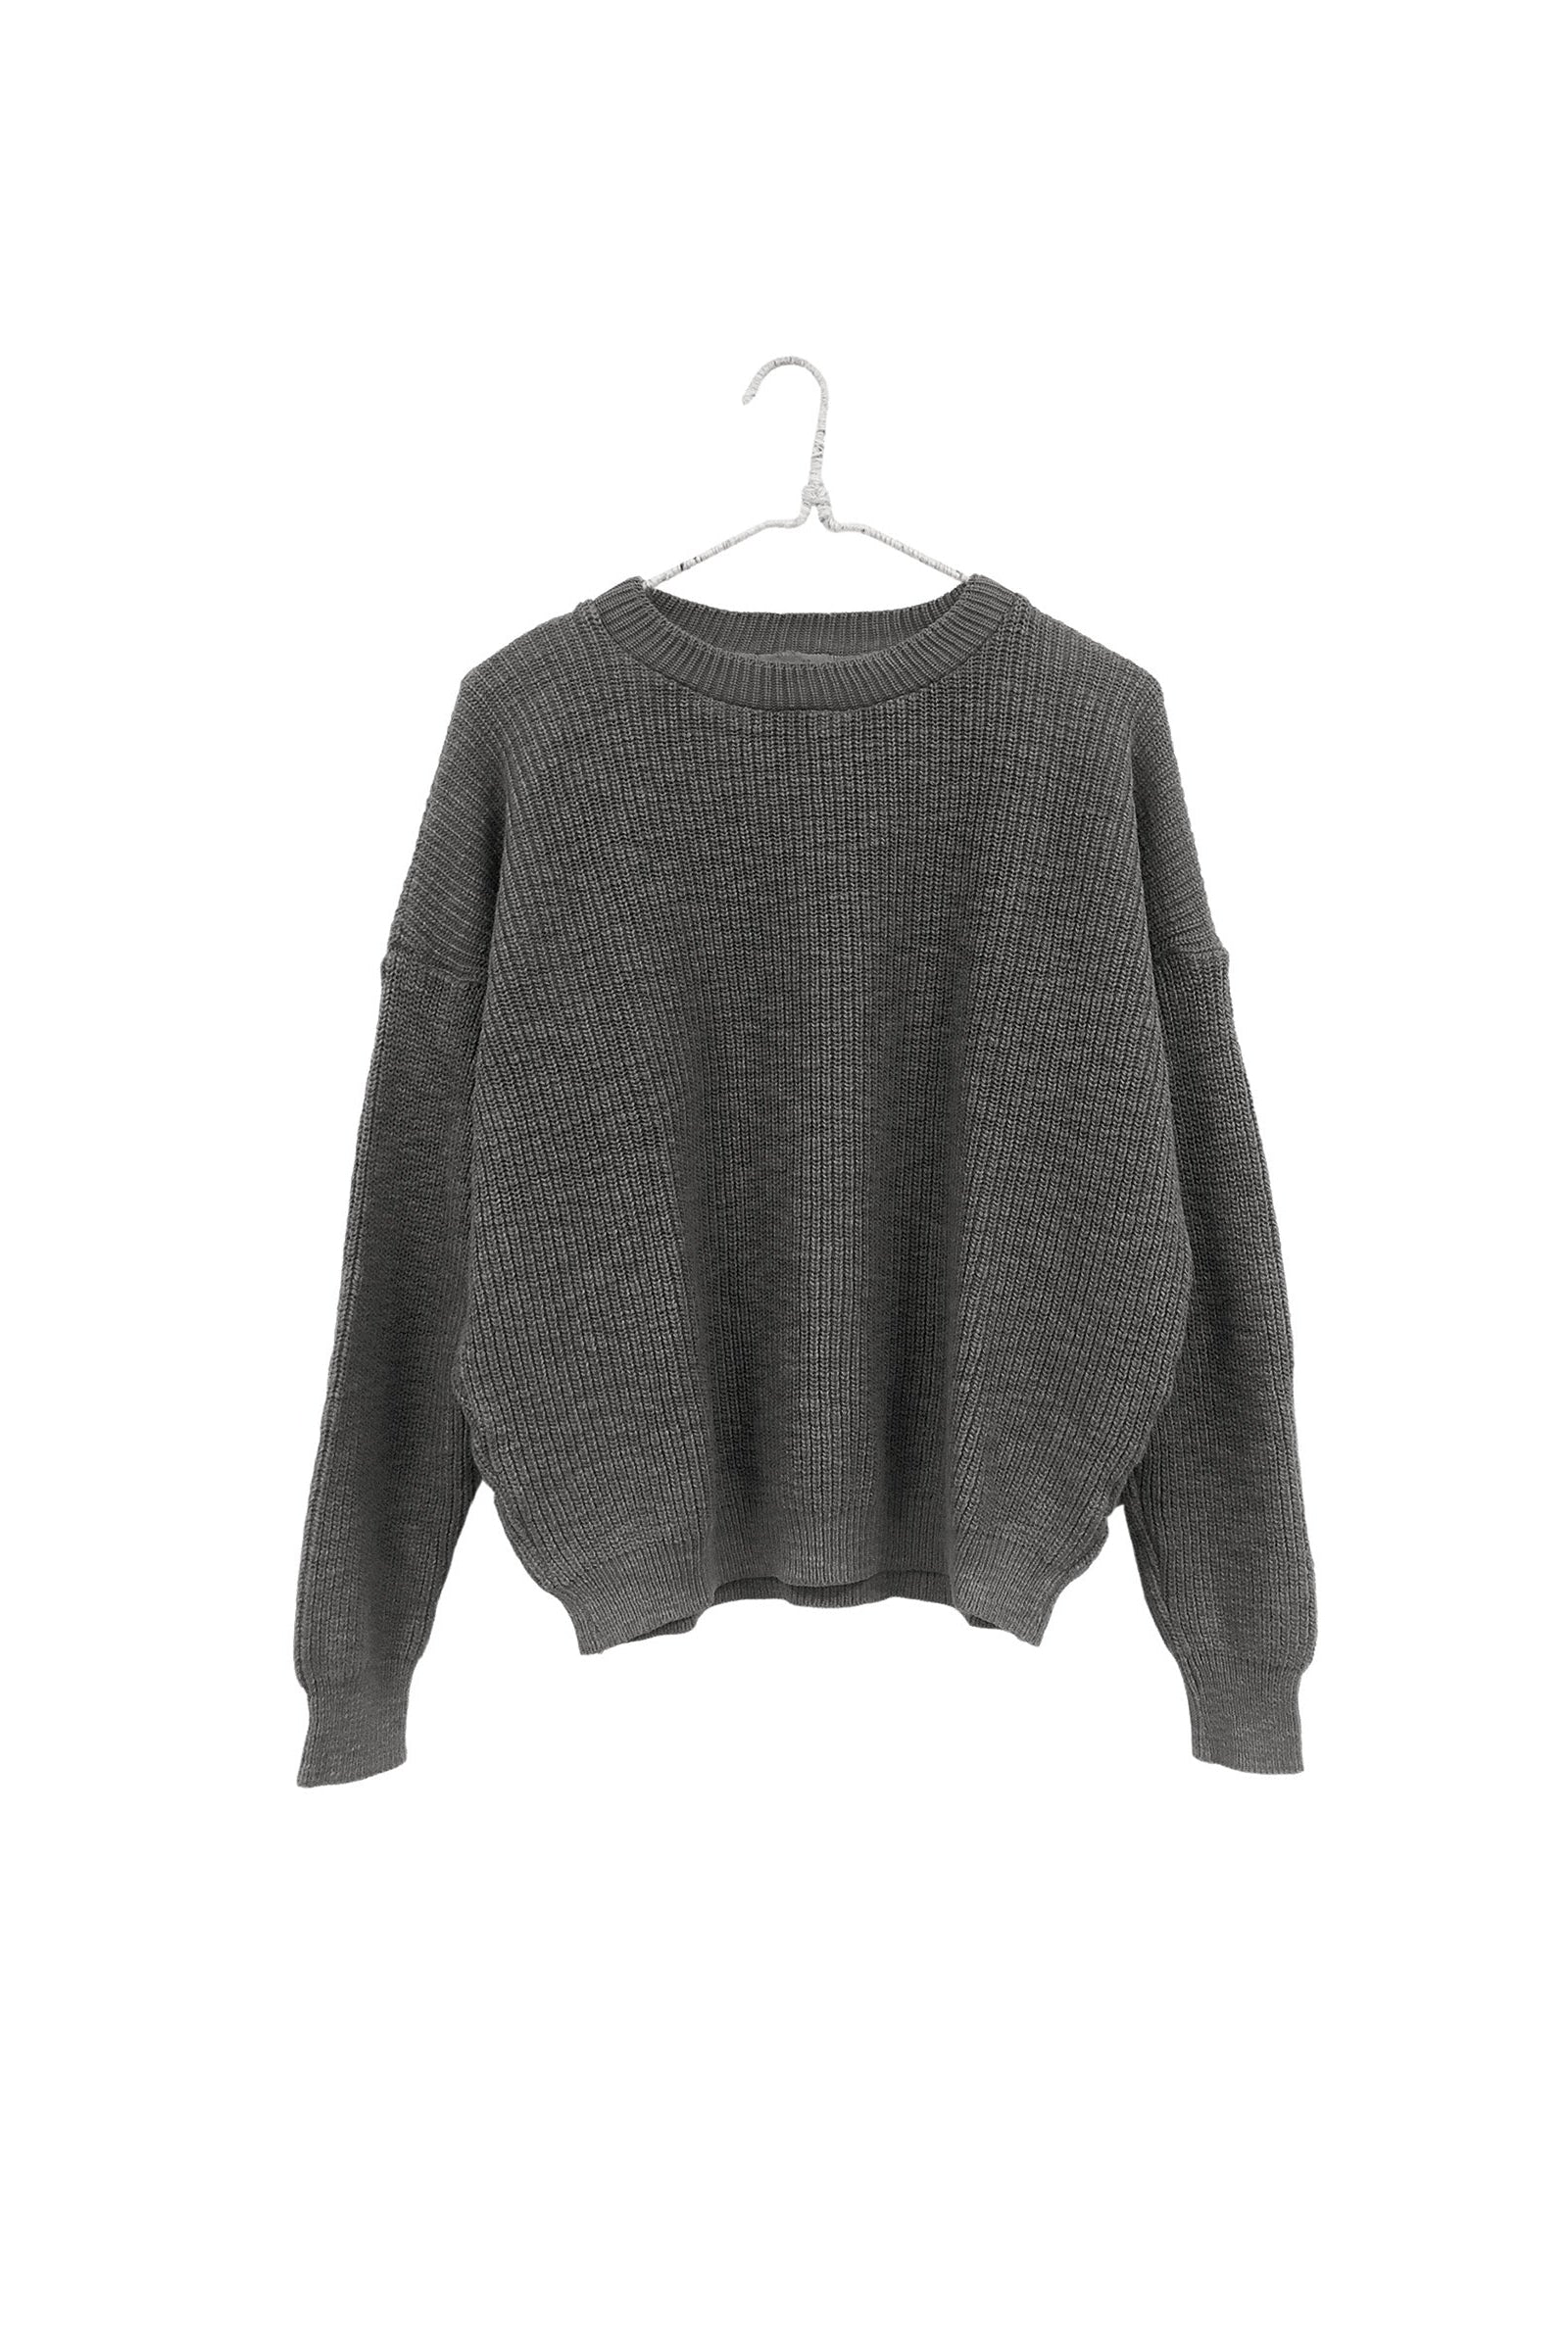 It Is Well LA - Elevated Ethical Basics Made in USA - Chunky Cotton Pull-On Sweater